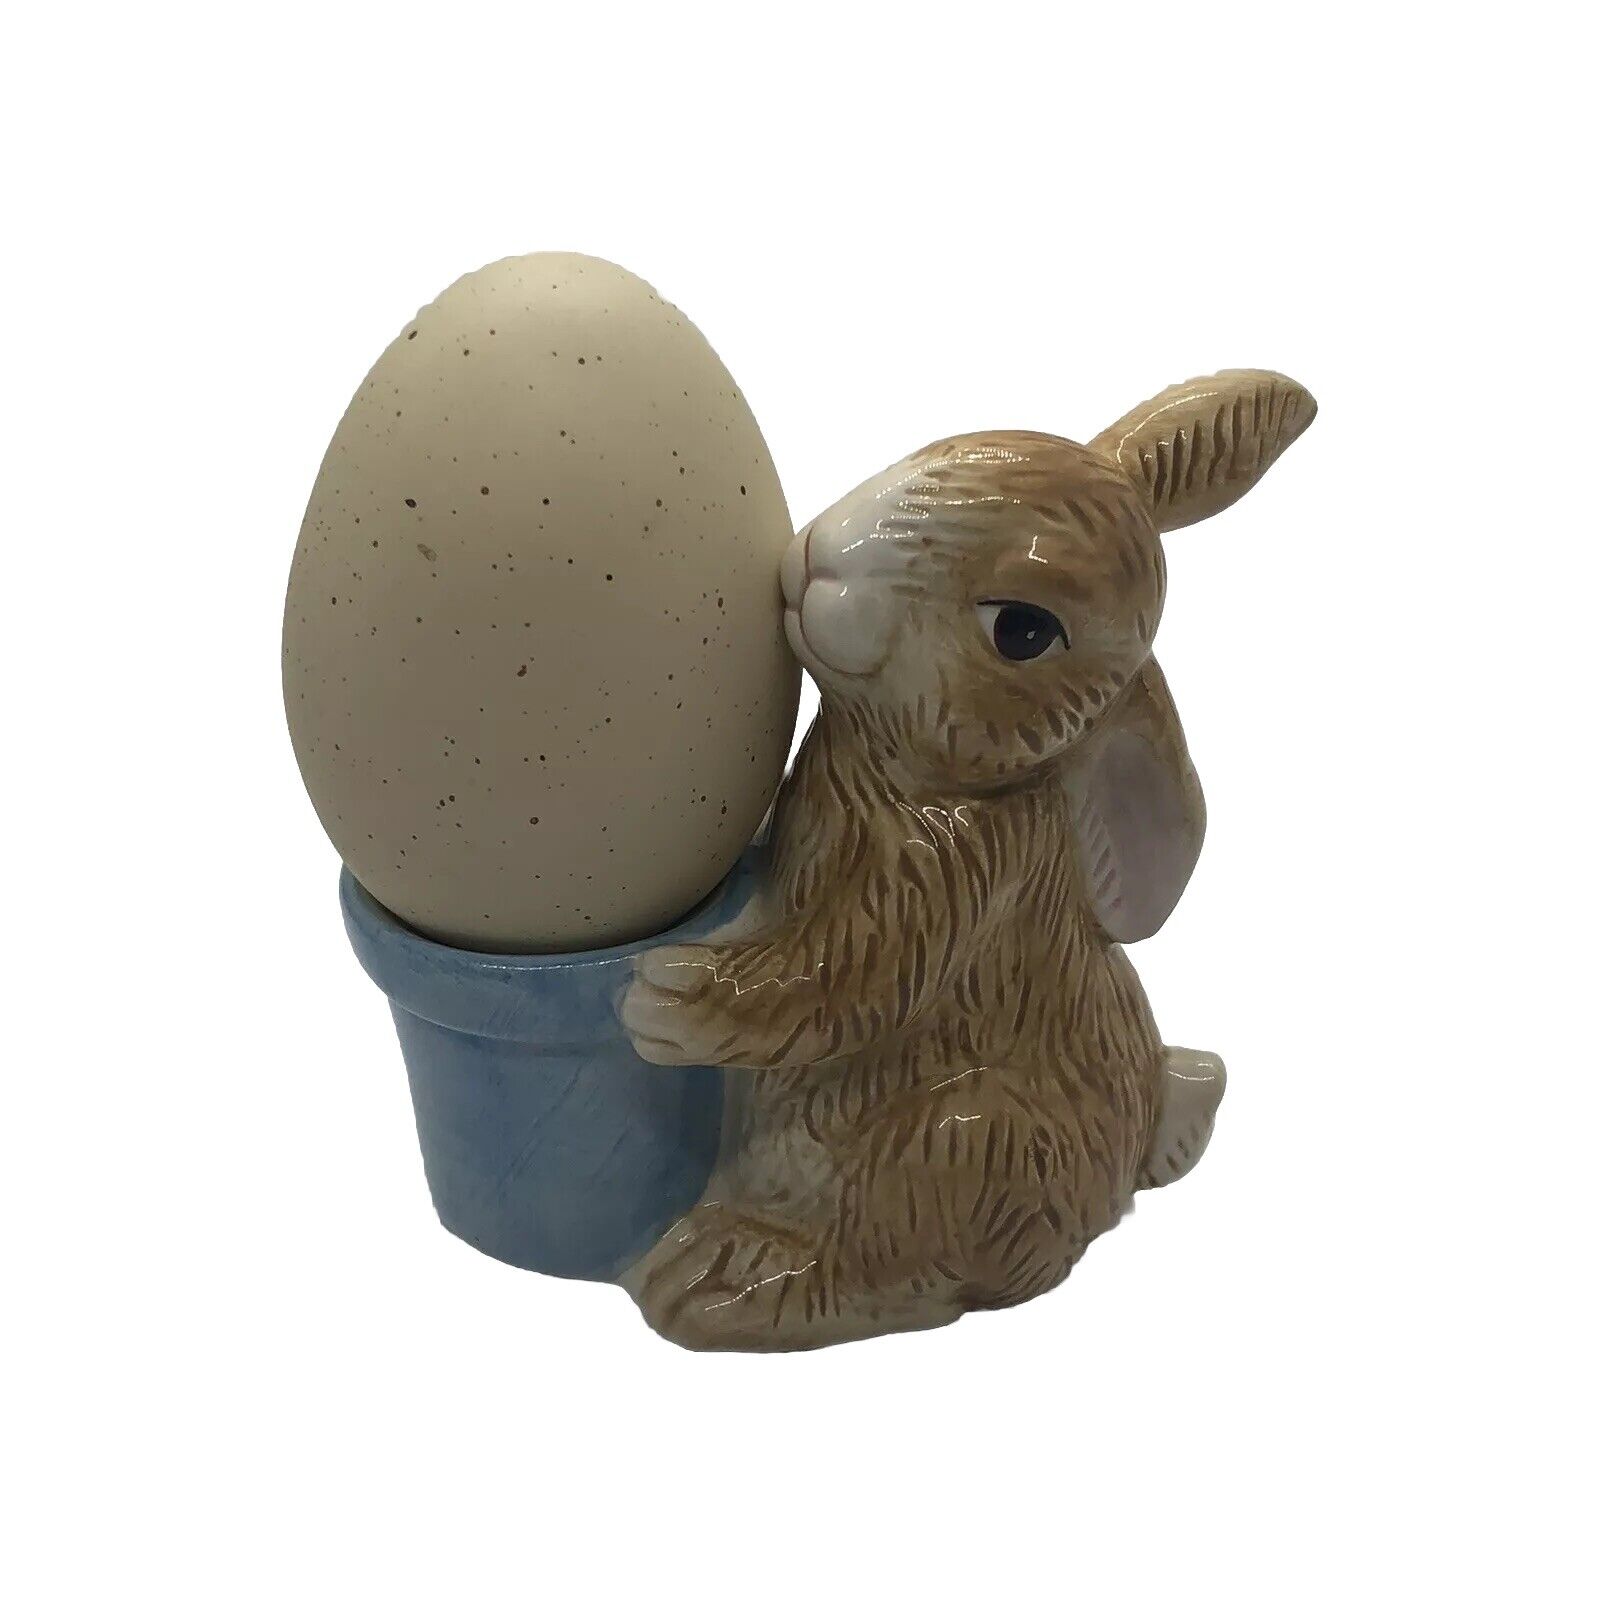 Easter Egg display Cake Stand Egg Holder Bunny Beige Egg REPLACEMENT 3.5” Costco